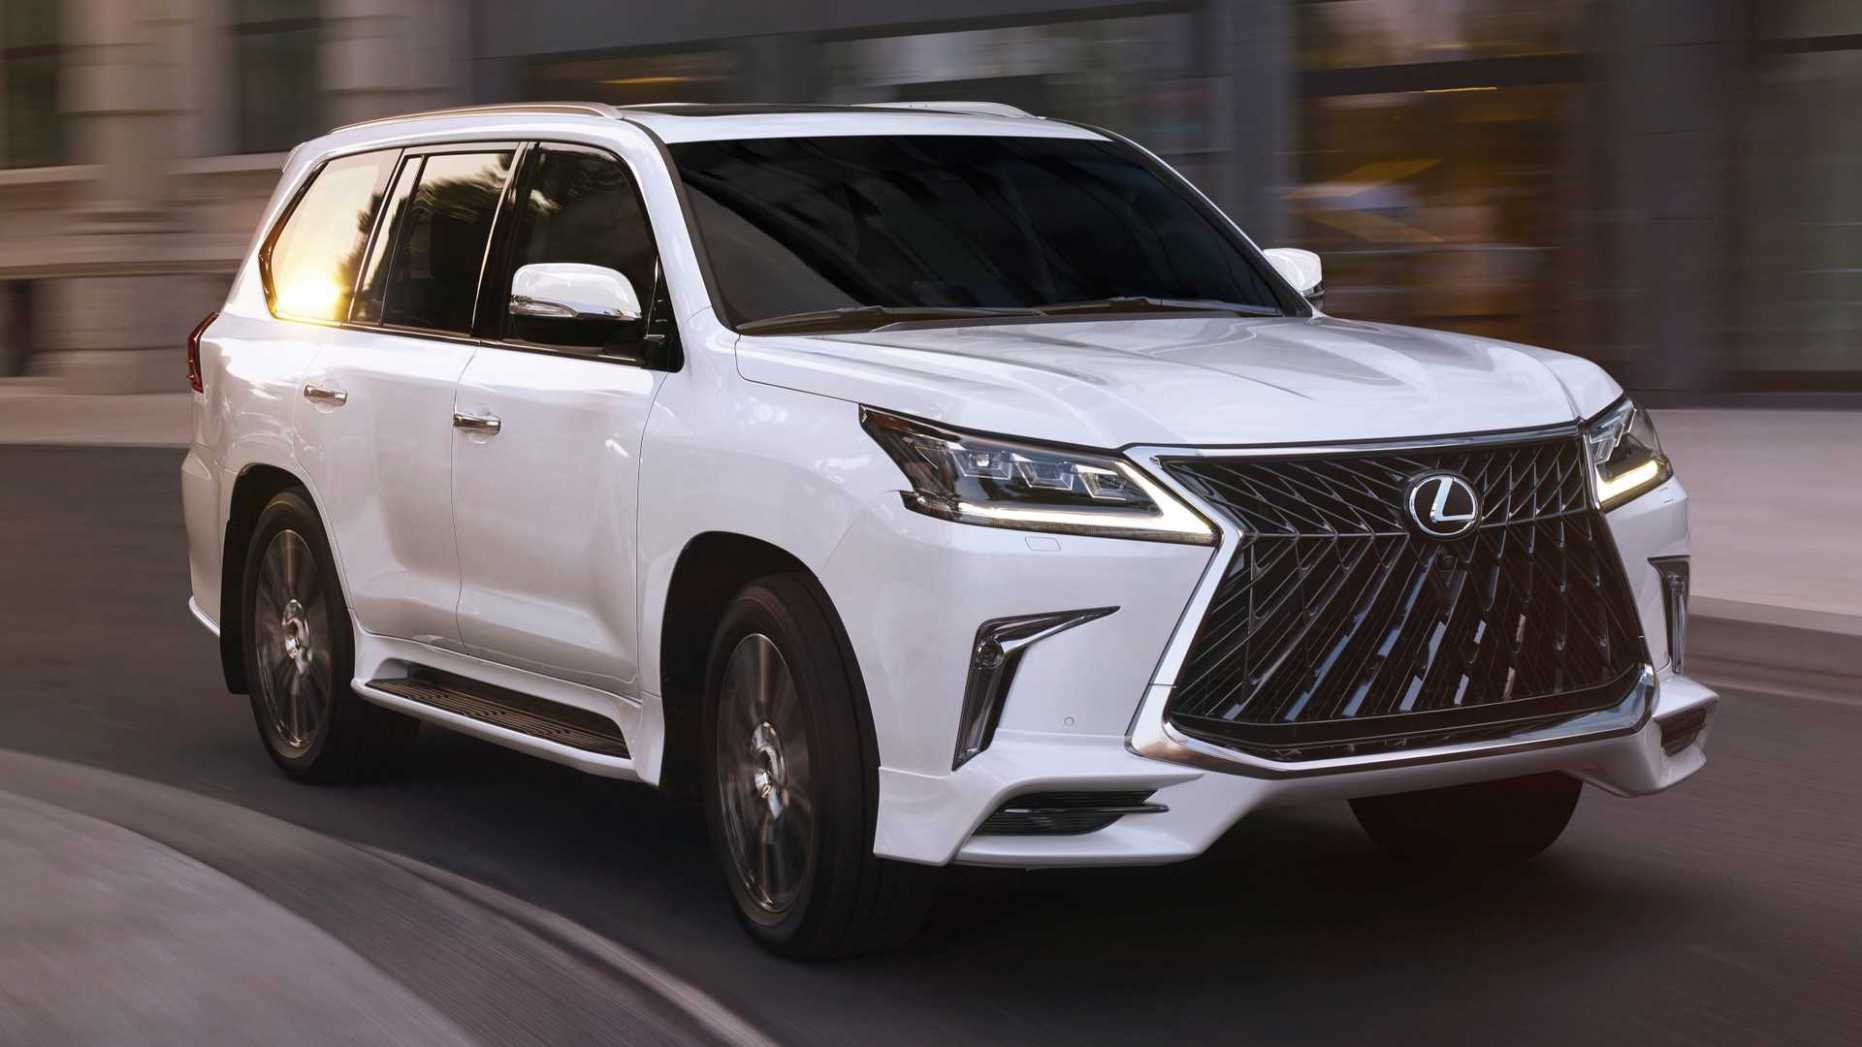 Redesign and Concept Lexus Gx New Model 2022